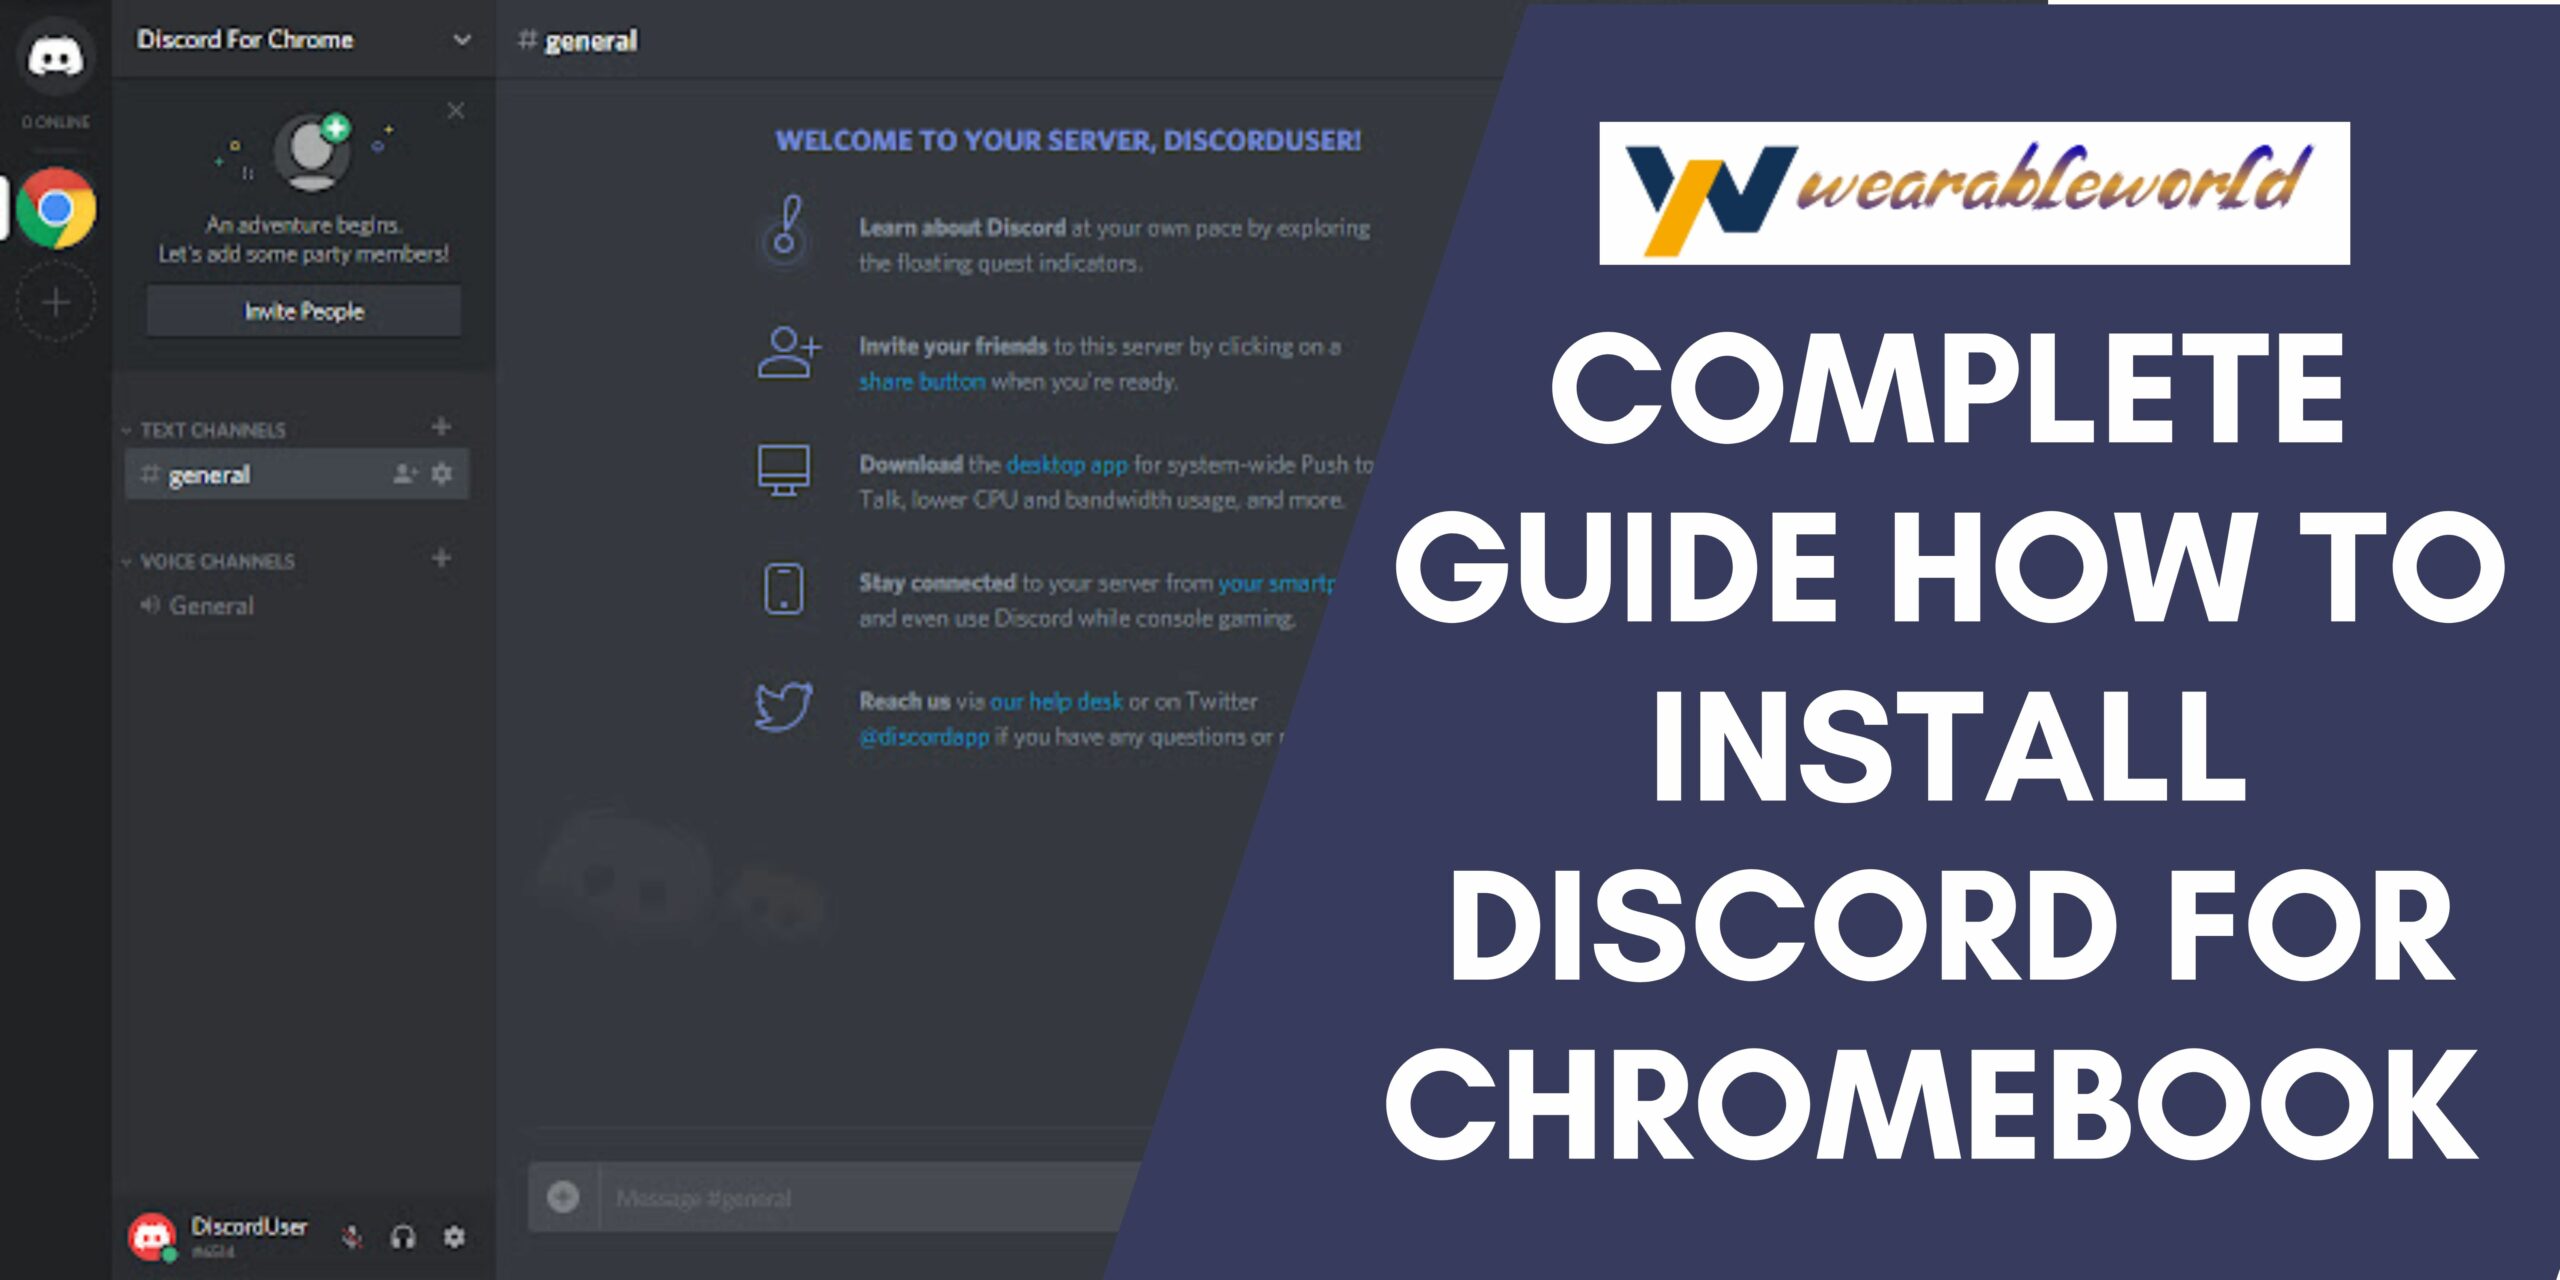 Complete Guide how to install Discord for Chromebook